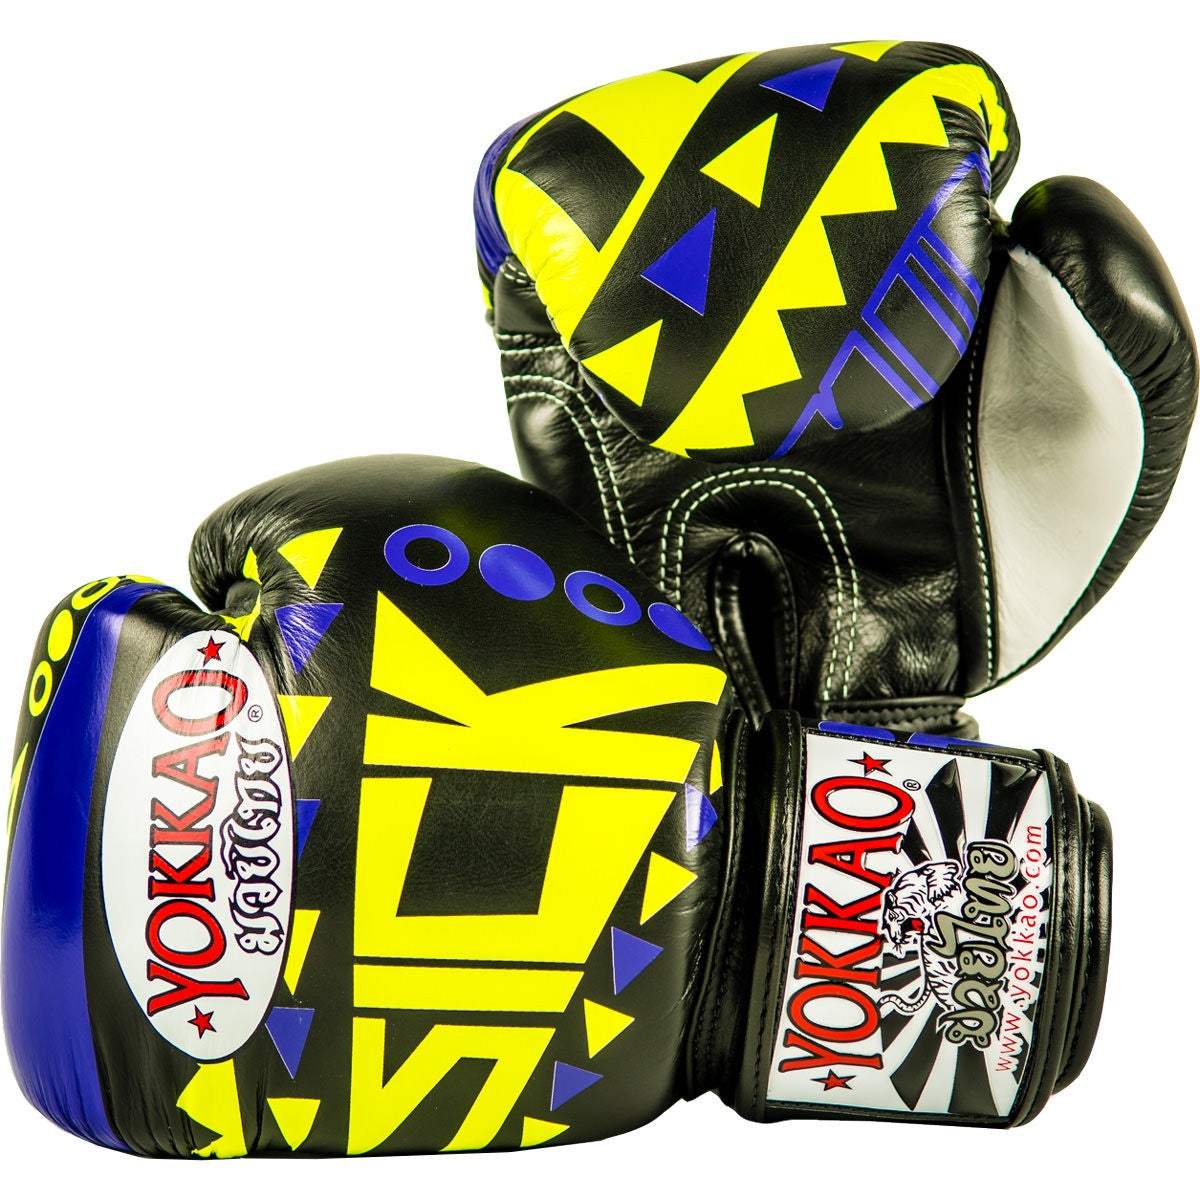 Sick Muay Thai Boxing Gloves Violet/Yellow